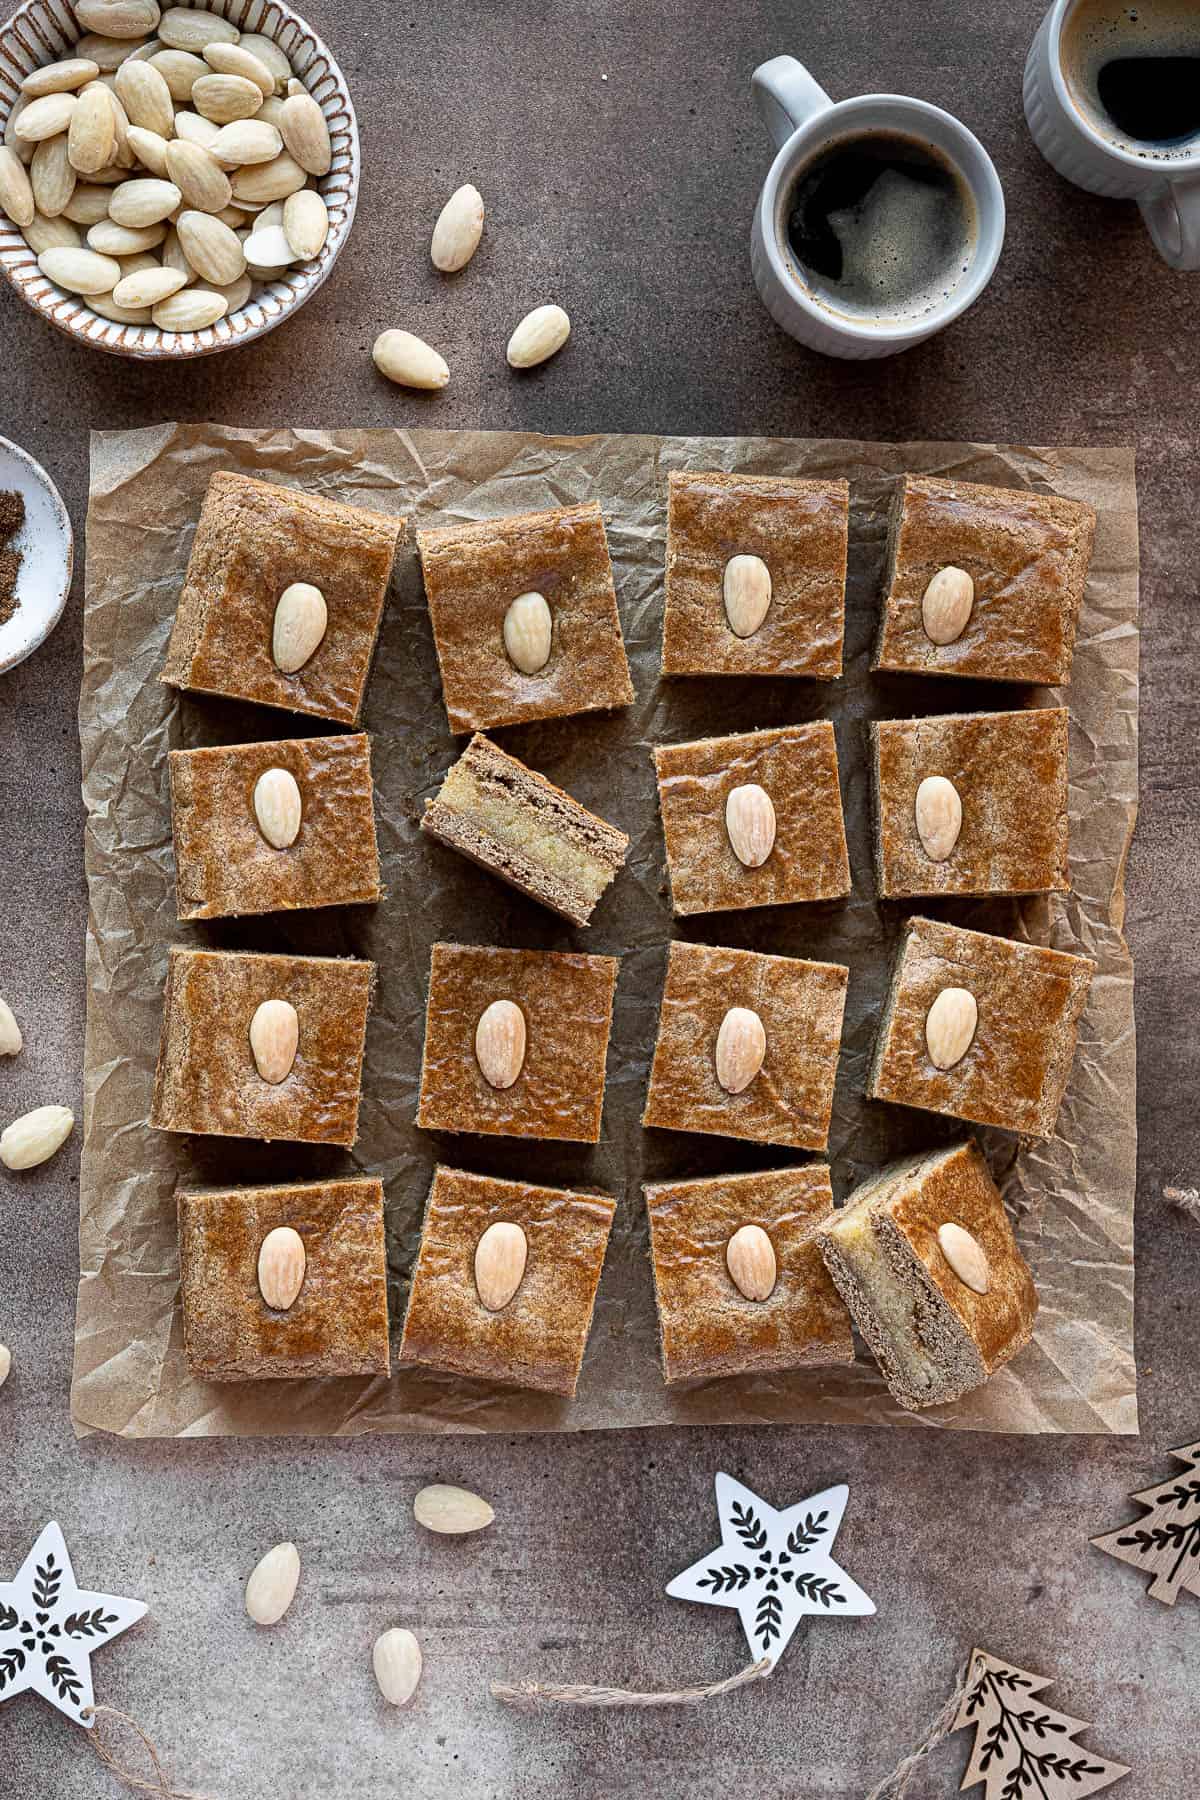 Squares of vegan gevulde speculaas surrounded by cups of coffee, a bowl of almonds and Christmas decorations.